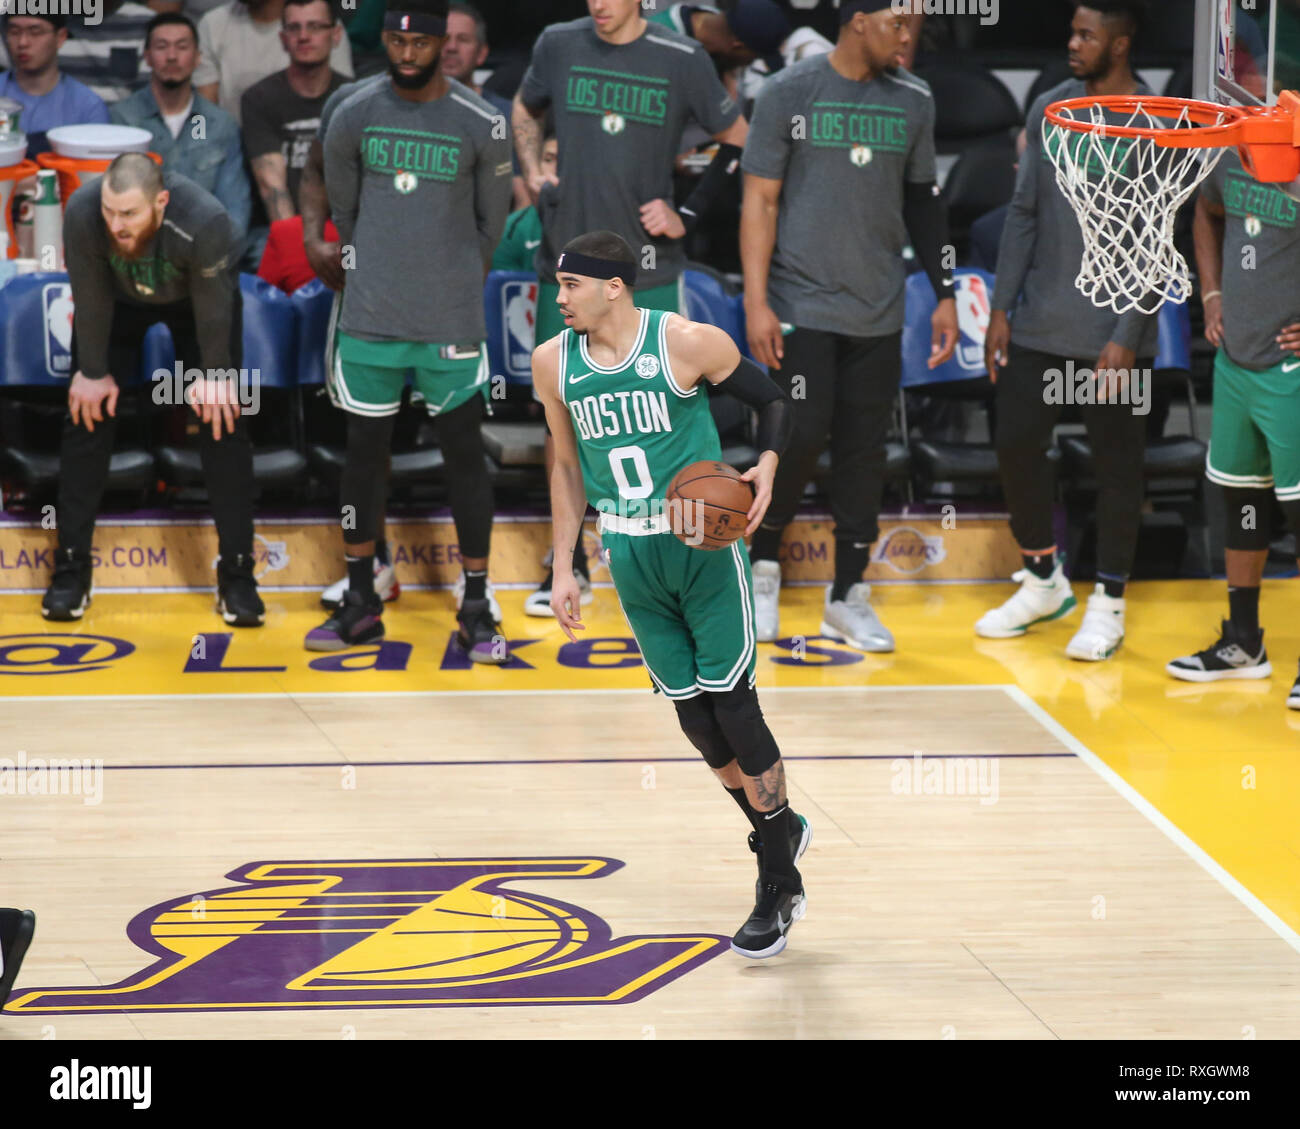 Boston Celtics forward Jayson Tatum #0 during the Boston Celtics vs Los Angeles Lakers game at Staples Center in Los Angeles, CA on March 09, 2019. (Photo by Jevone Moore) Stock Photo